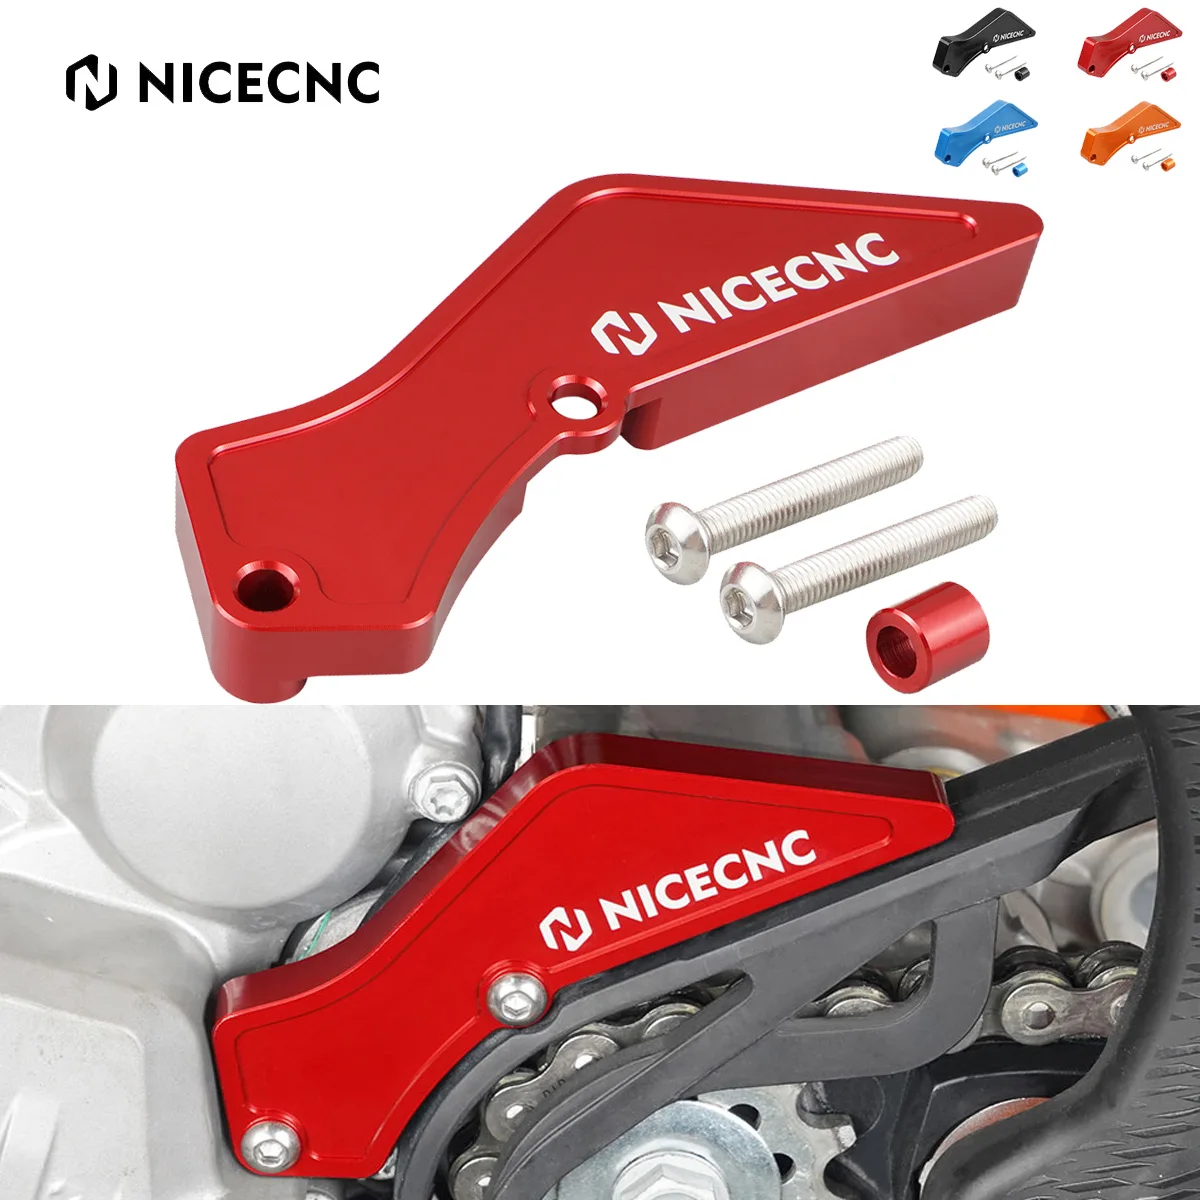 

NiceCNC Motorcycle 4T Case Saver Sprocket Guard Protector for GasGas EC EX MC 250F 350F 250 350 F 2021 2022 2023 Chain Cover